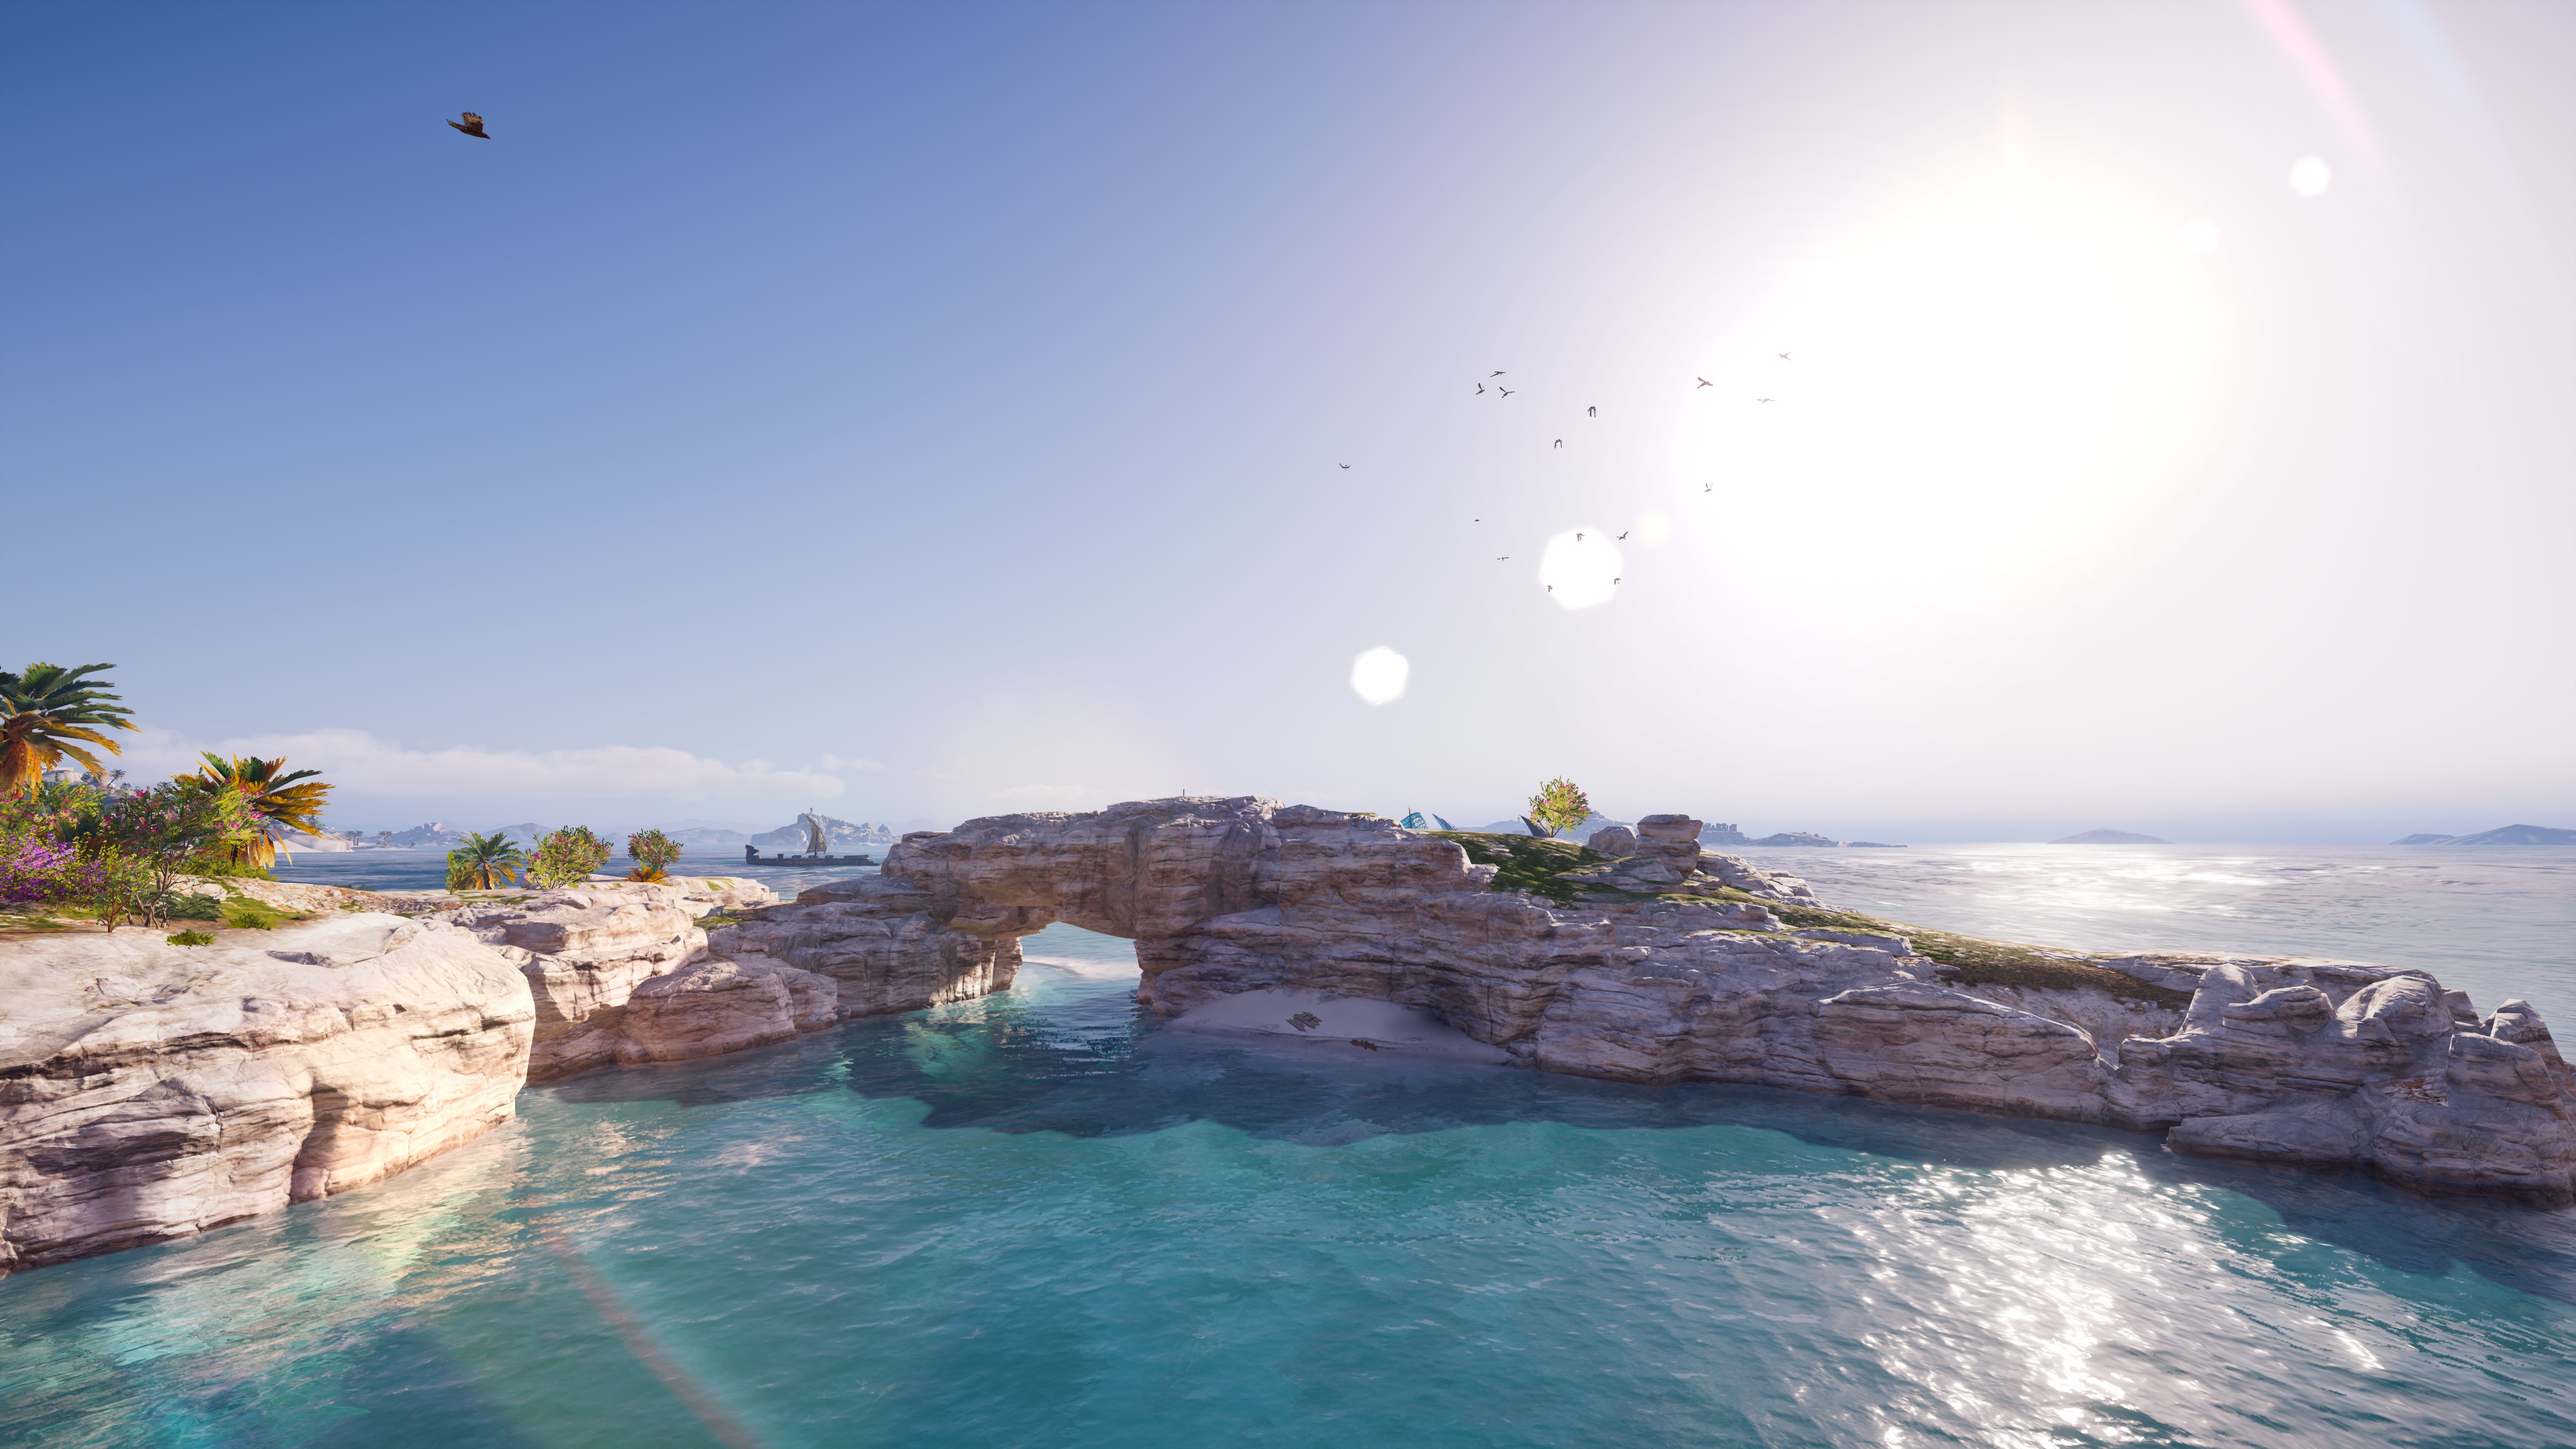 Assassins Creed Odyssey Assassins Creed Island Beach Video Game Landscape Video Games PC Gaming Scre 3840x2160